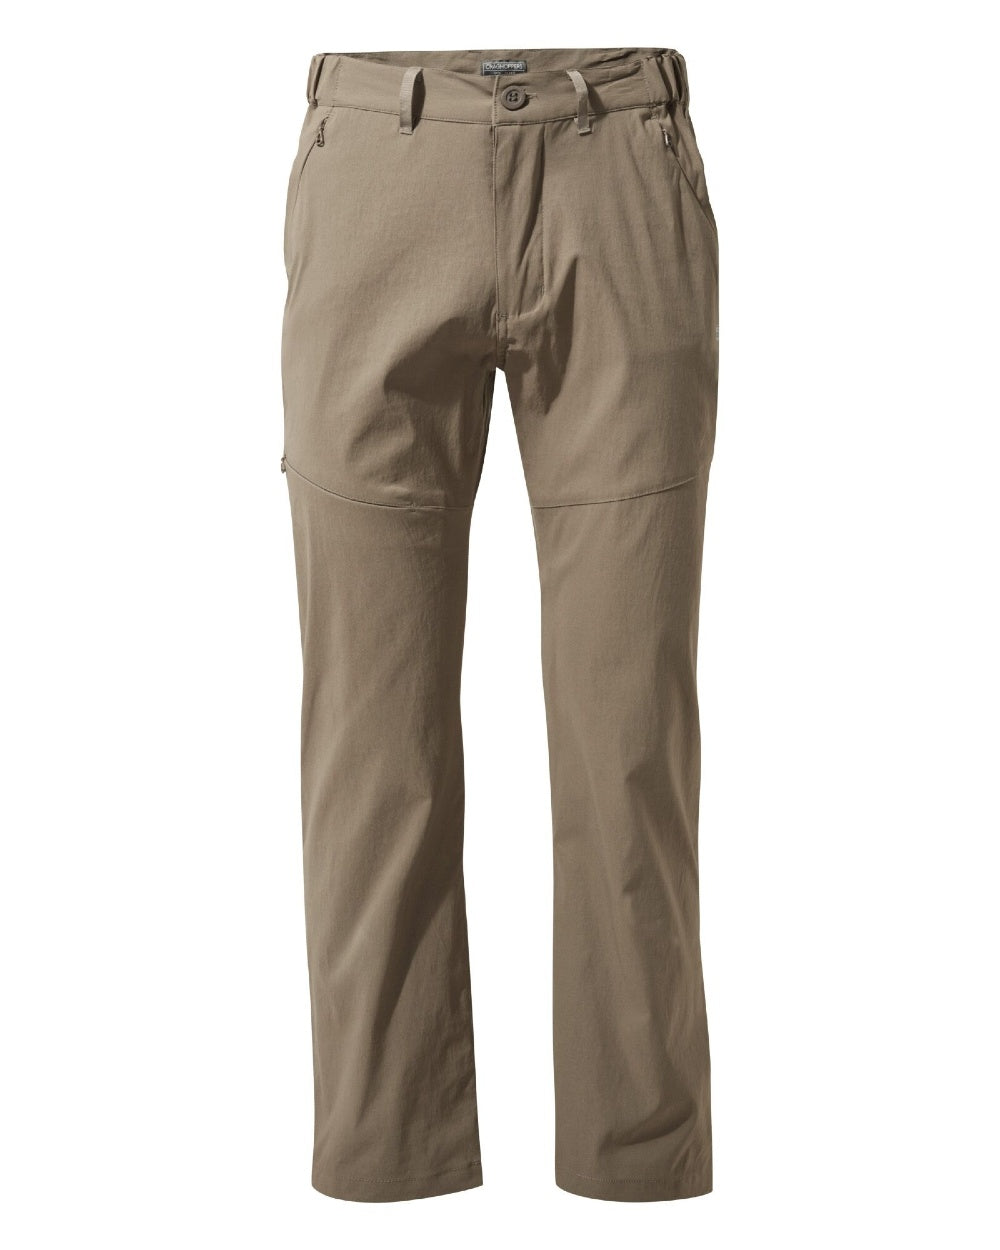 Pebble Coloured Craghoppers Mens Kiwi Pro II Trousers On A White Background 